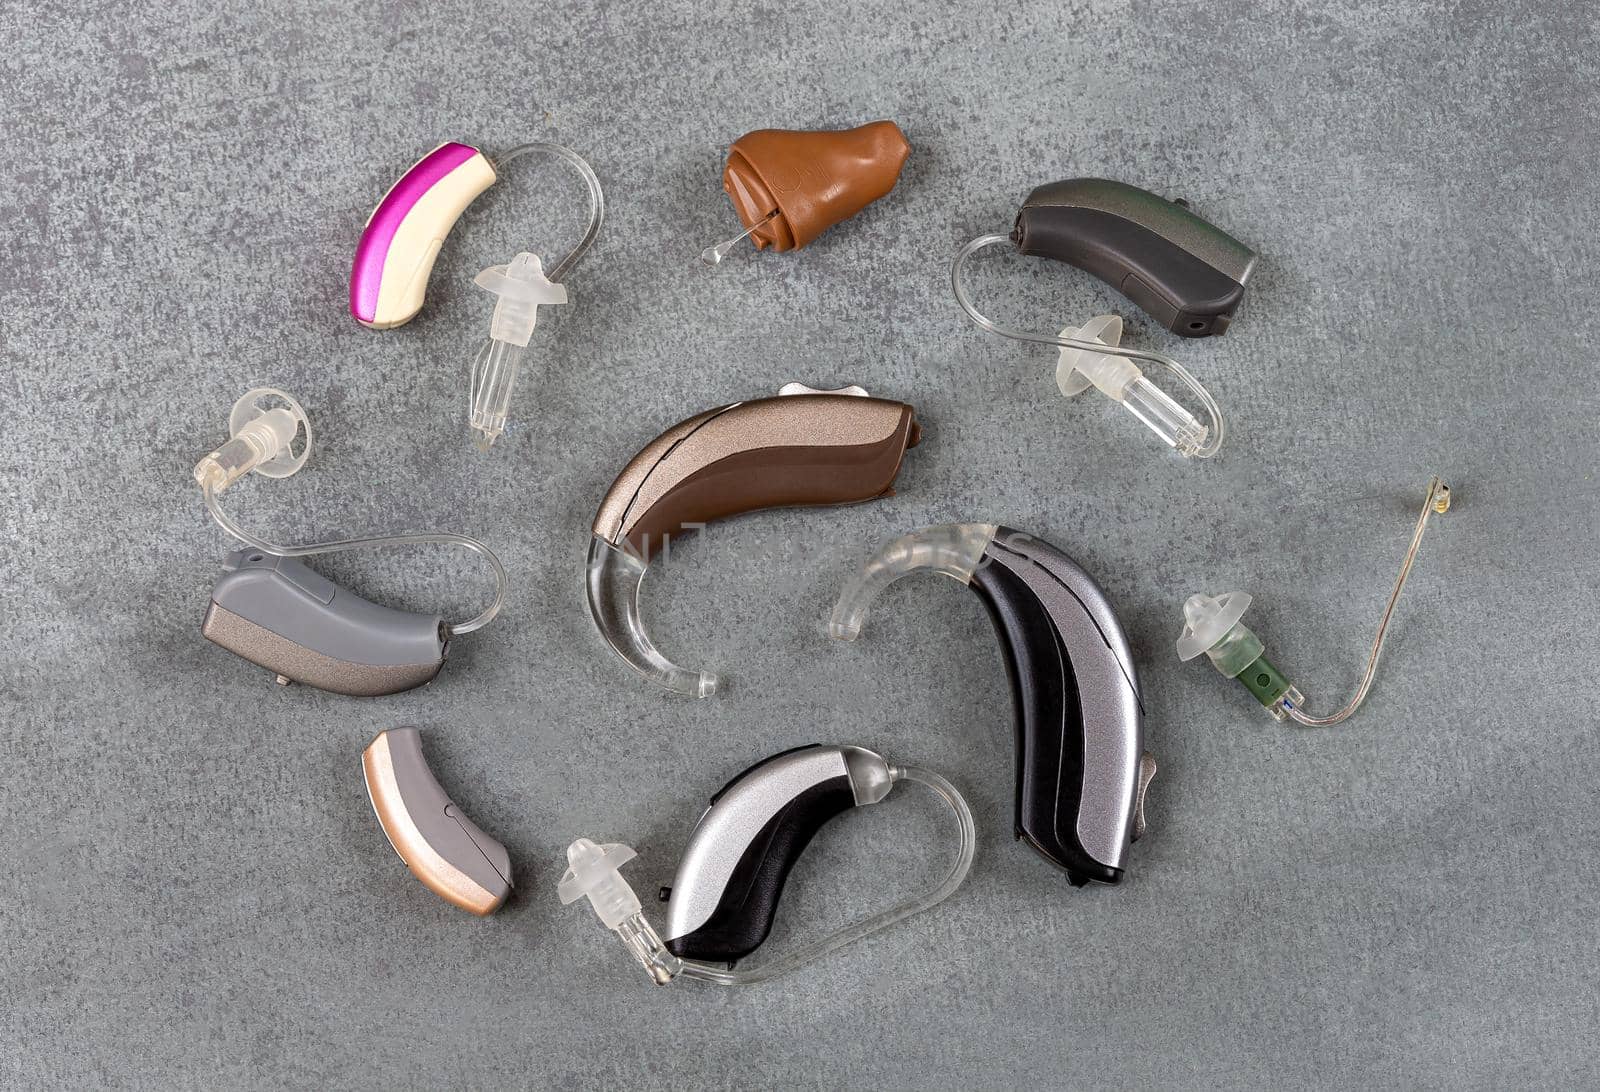 Hearing aids - main hearing models type behind the ear by JPC-PROD